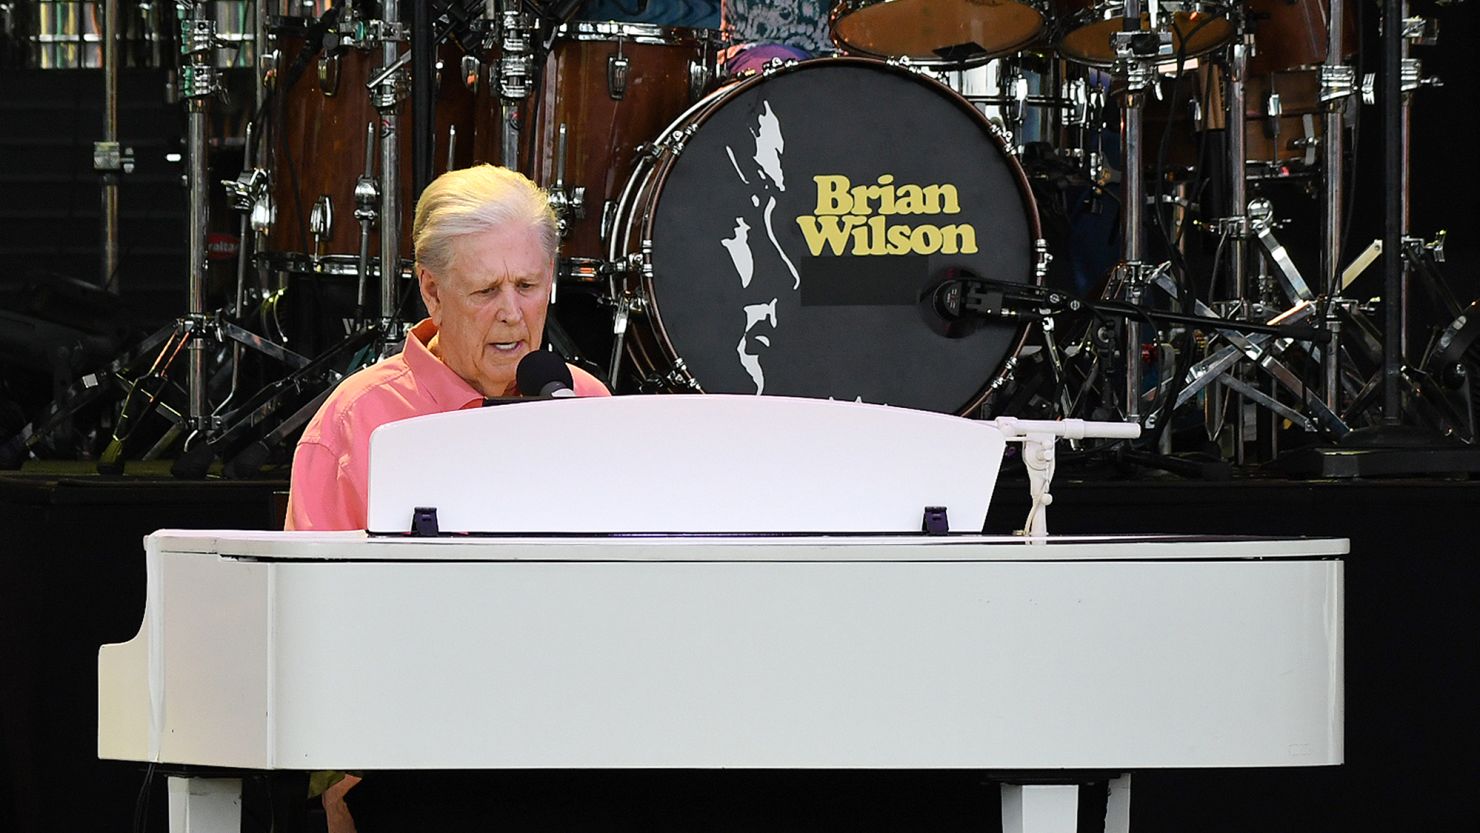 Musician Brian Wilson, seen here performing in June 2022, has been placed under conservatorship following a court ruling.